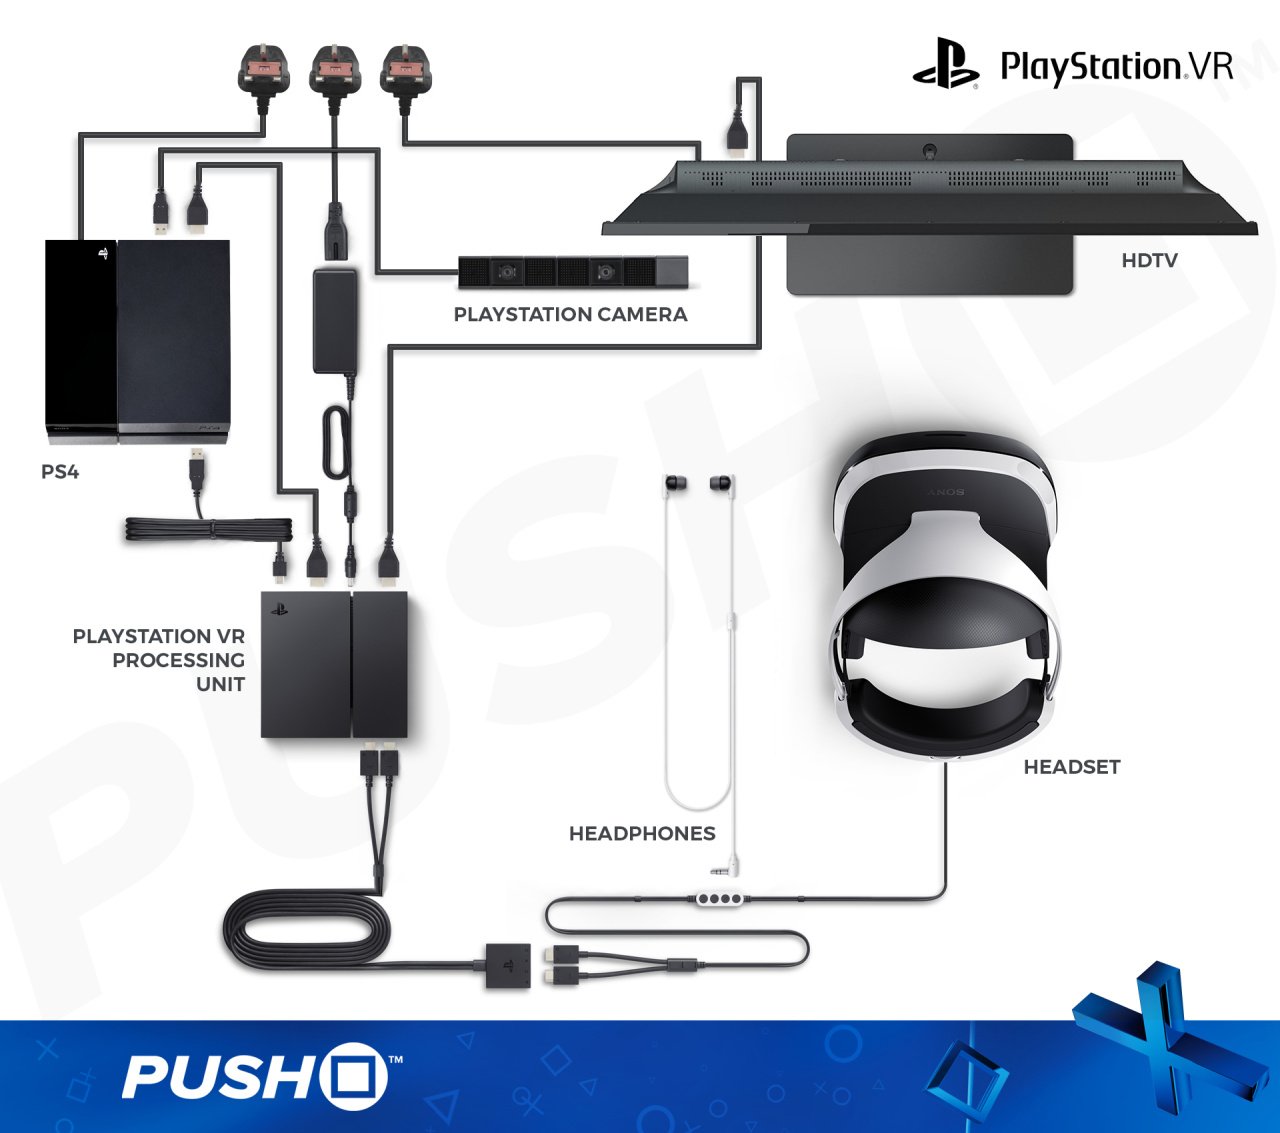 Hardware Review: PSVR - Should You PlayStation VR? Push Square